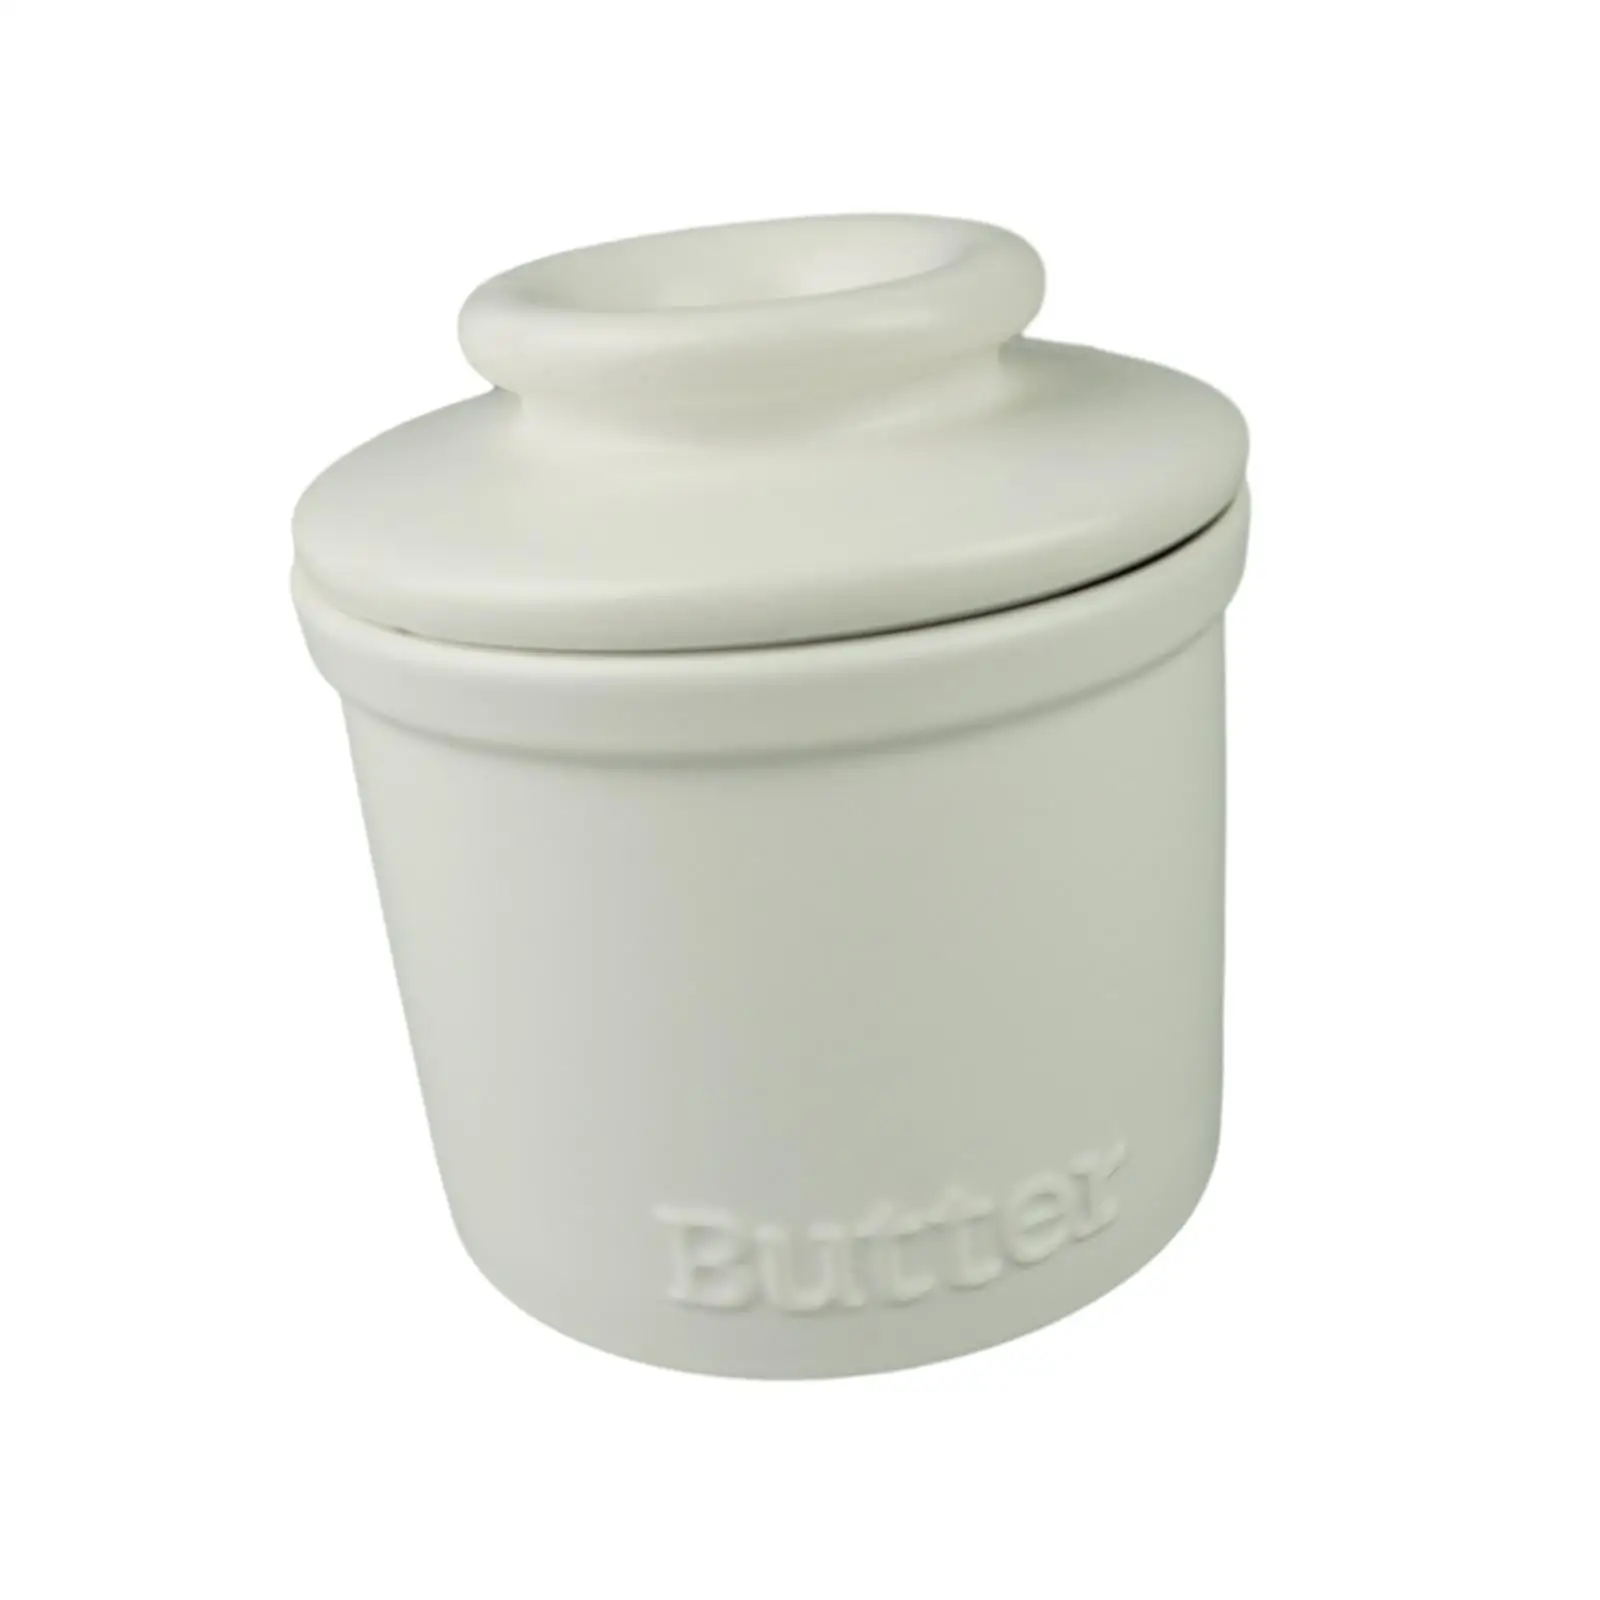 Butter Crock Smooth Glaze Ceramic  Keeping Case with Lid Butter Container